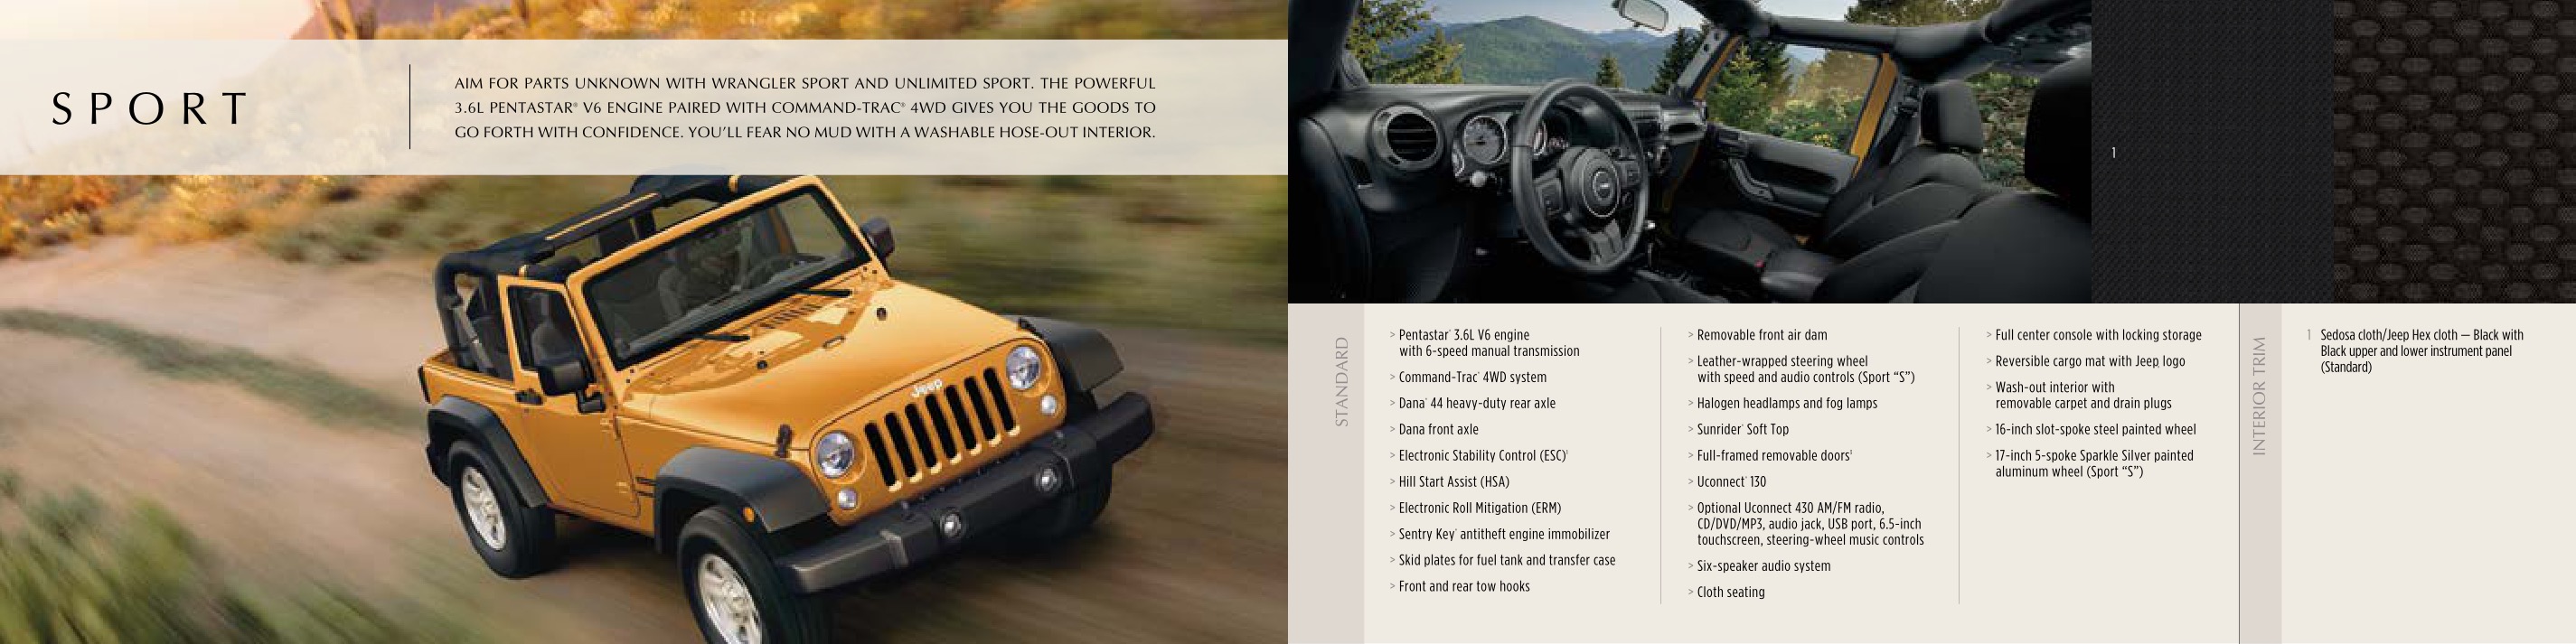 2014 Jeep Wrangler Specifications Page 3